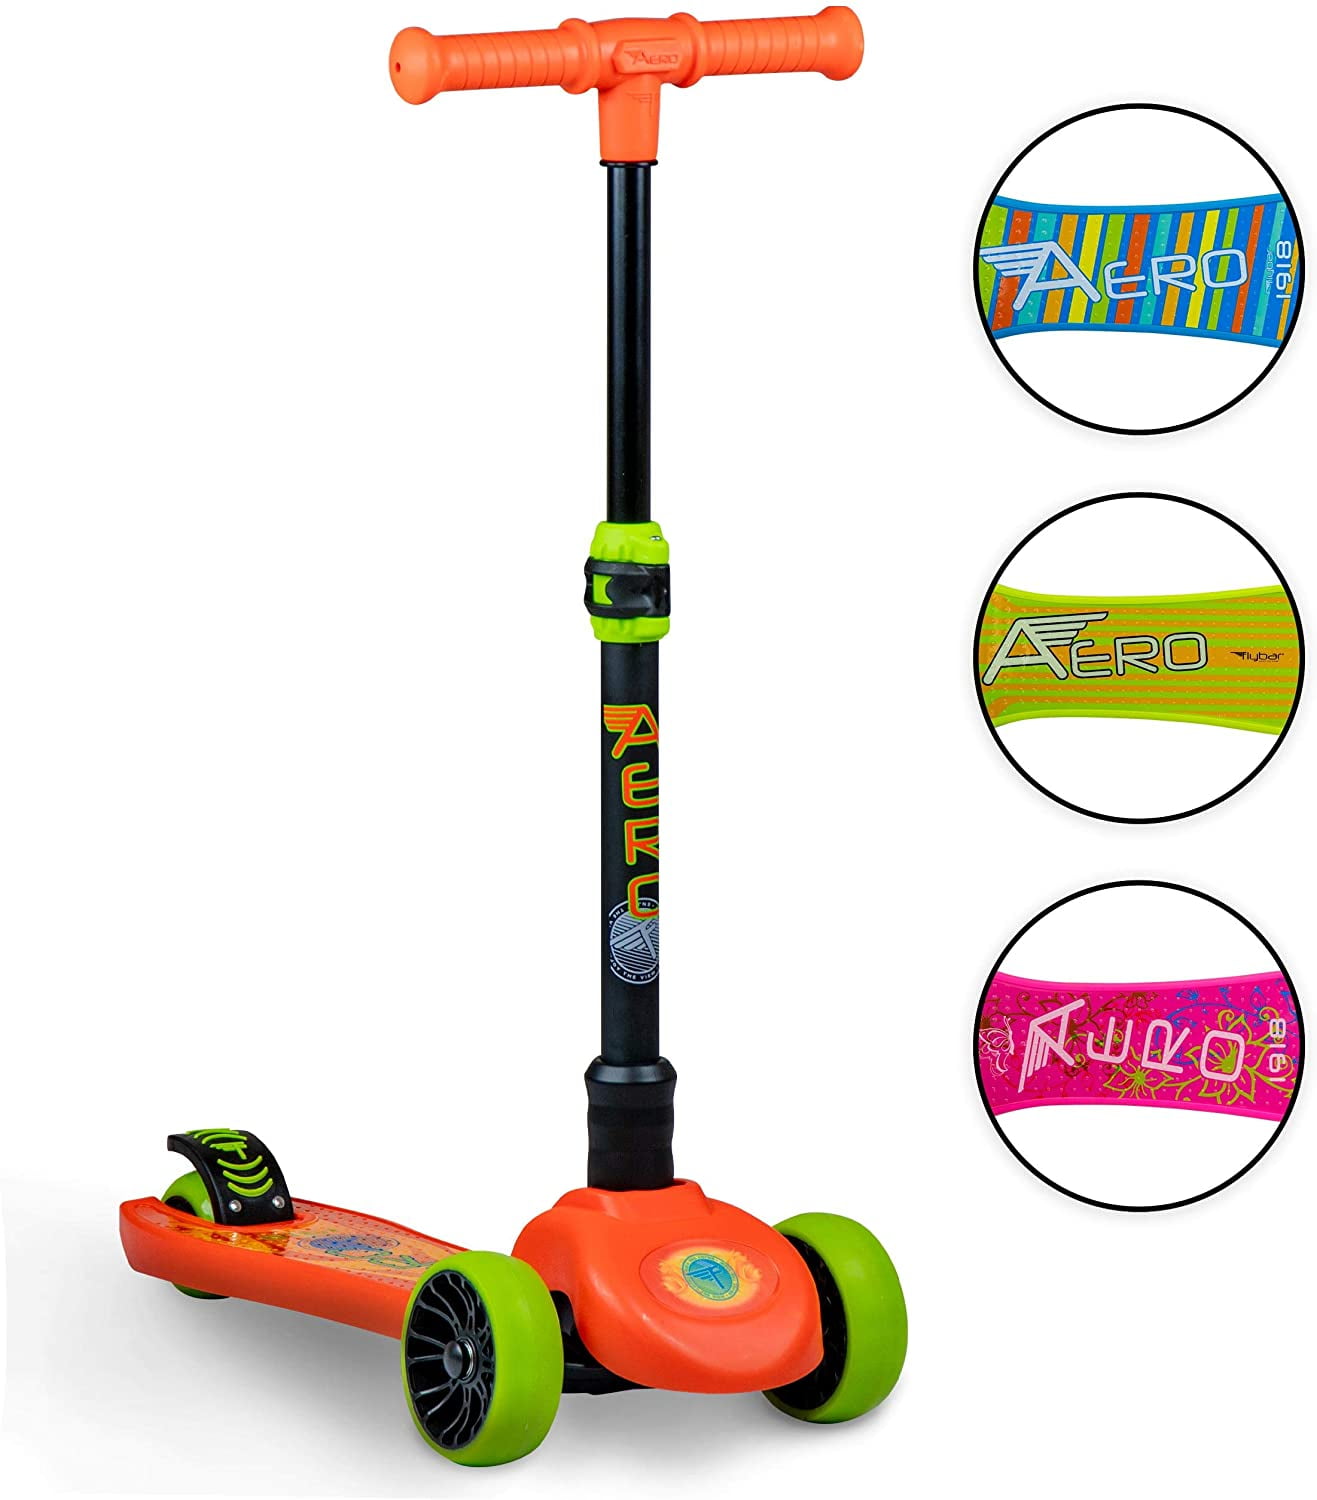 Details about   LED Scooter for Kids Luxury 3 Wheel Glider Adjustable With Kick n Go Lean 2 c 10 